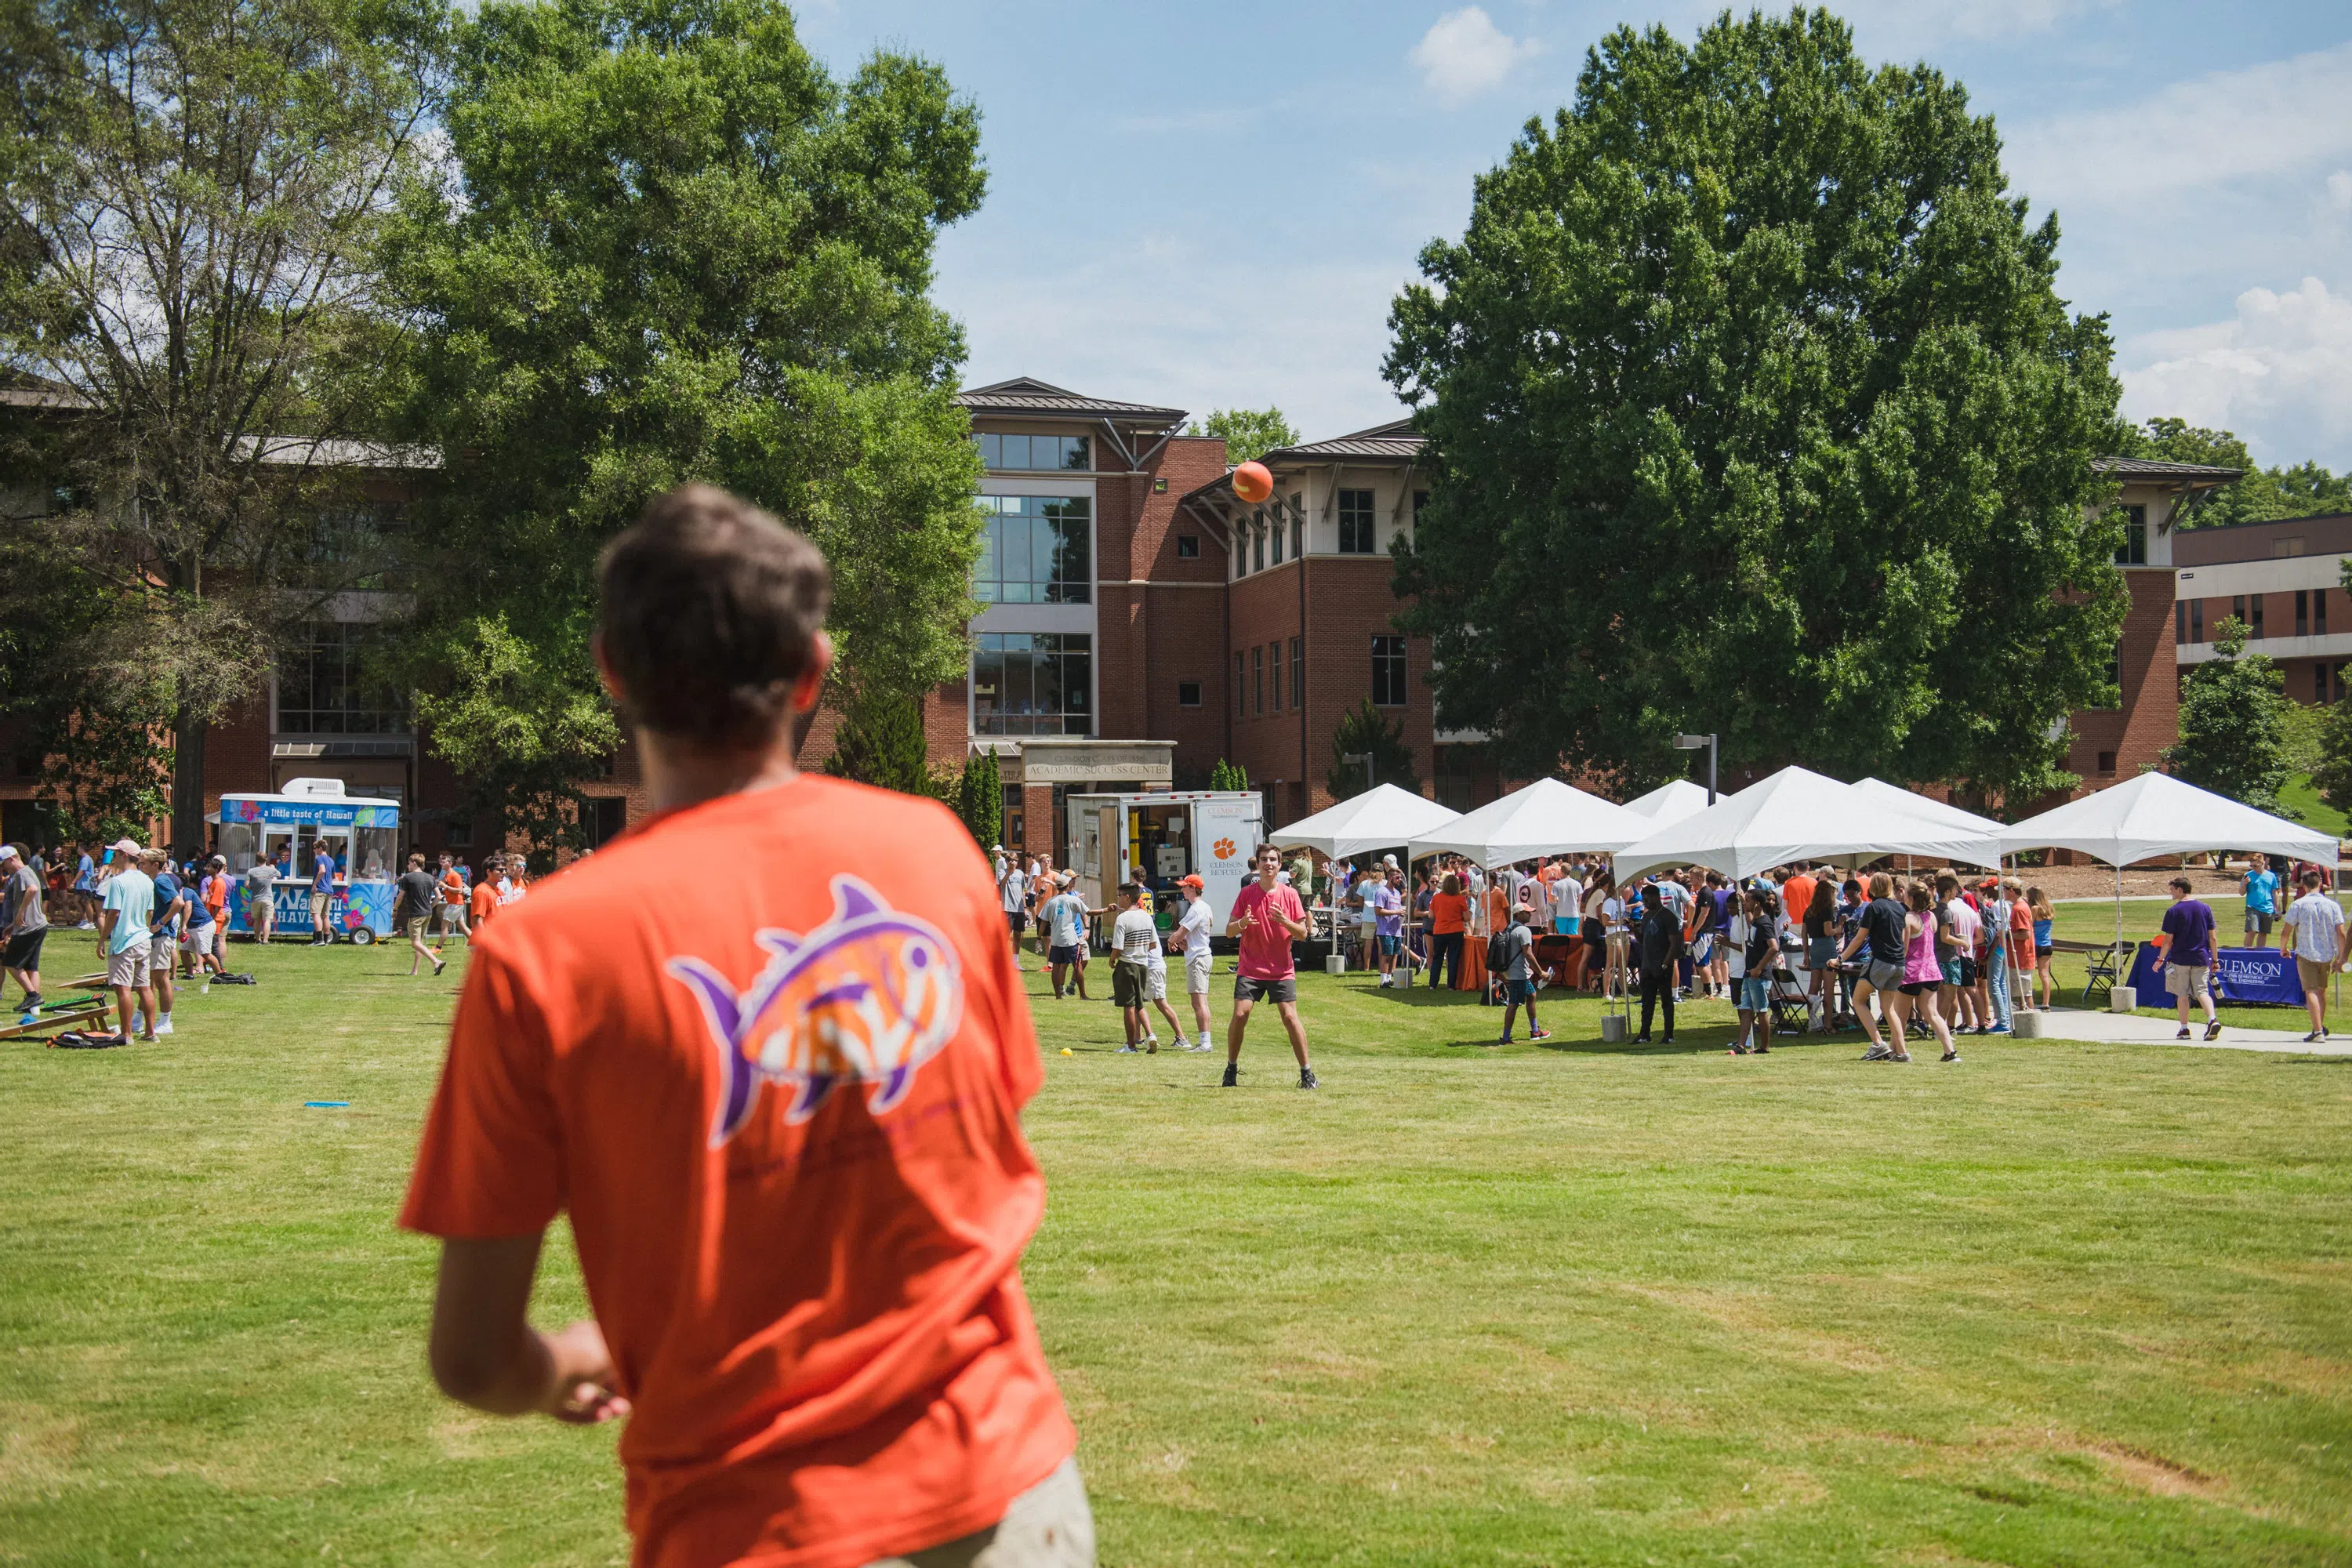 Groups of students participate in outdoor activities on the Watt Lawn.